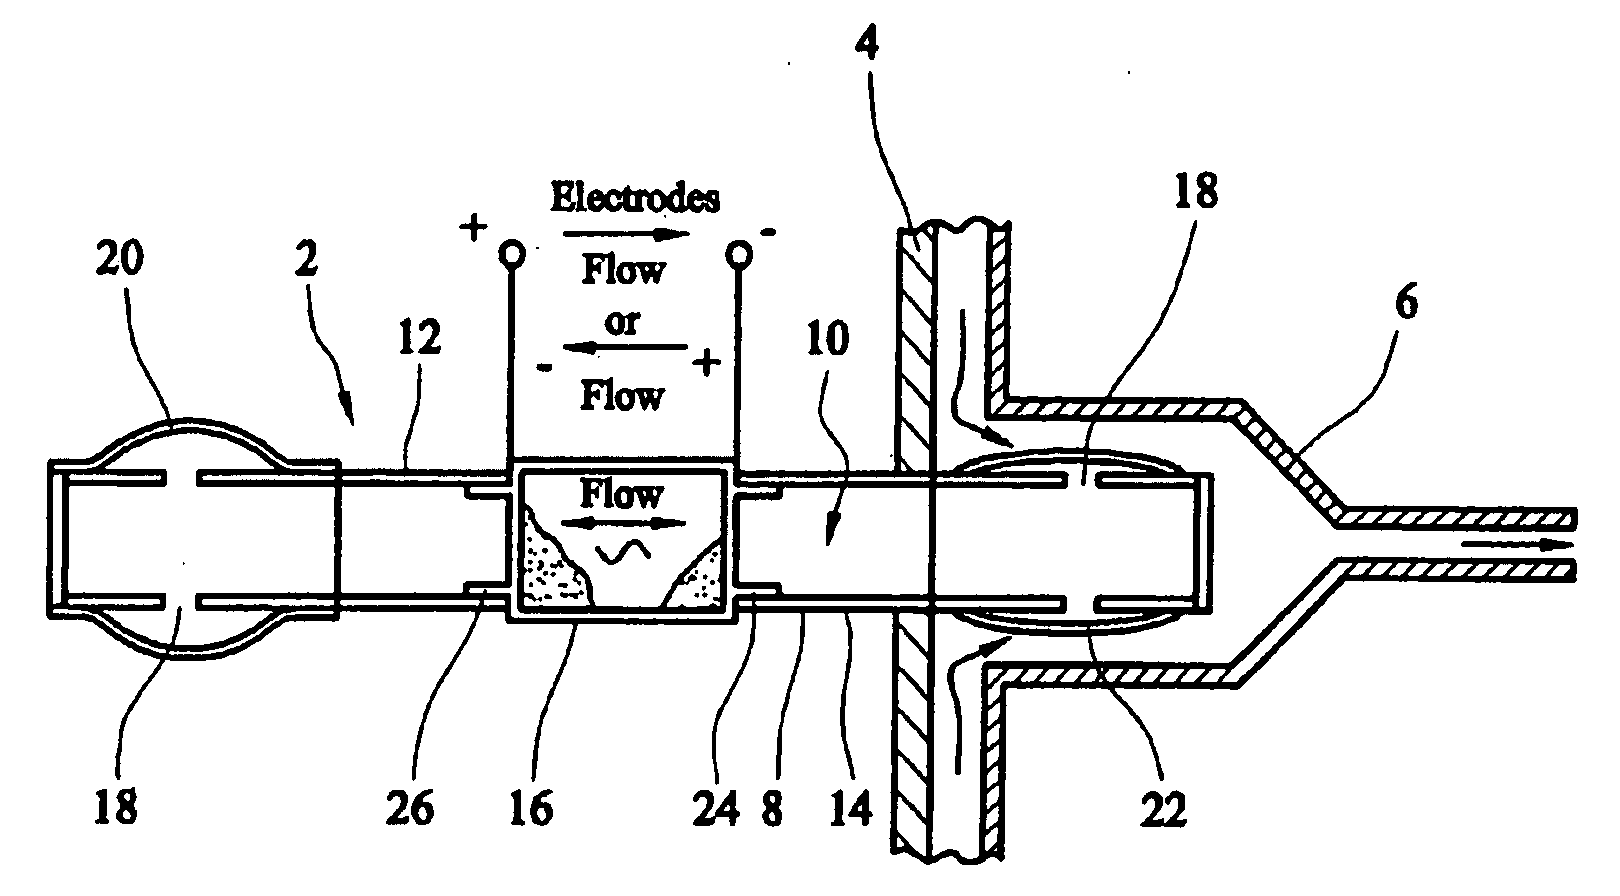 Valve for controlling flow of a fluid